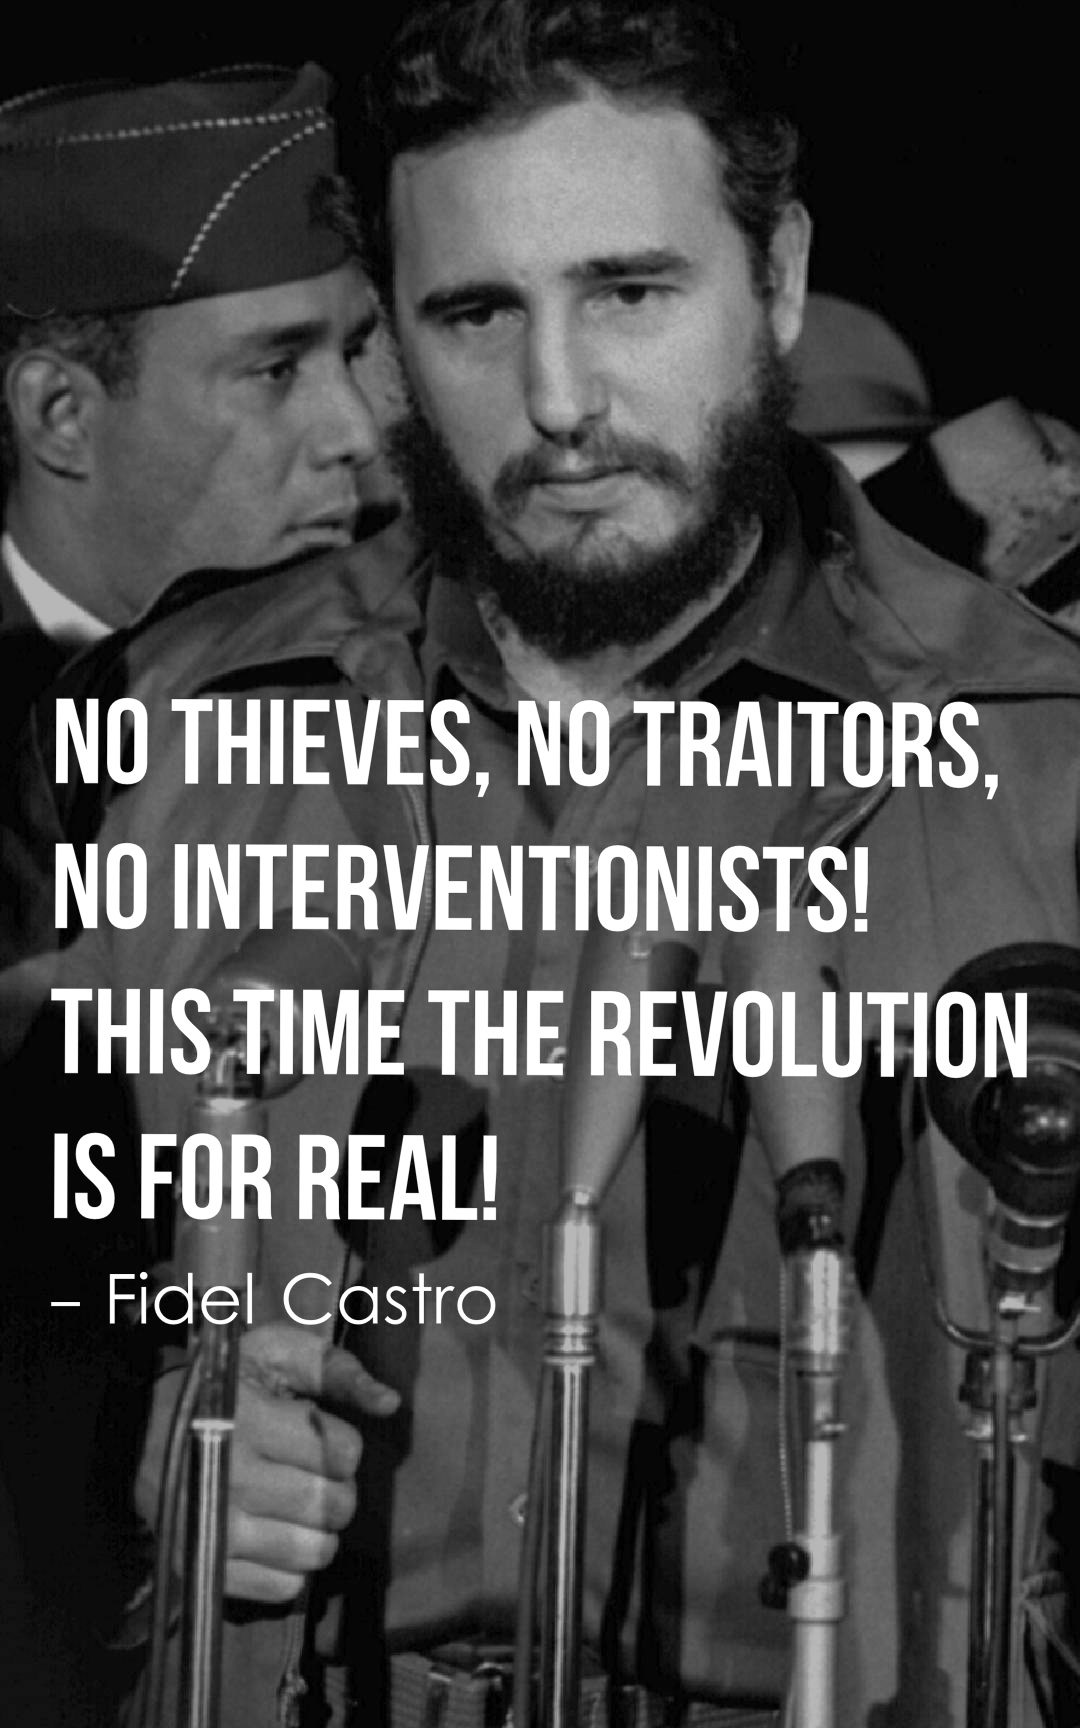 No thieves, no traitors, no interventionists! This time the revolution is for real!